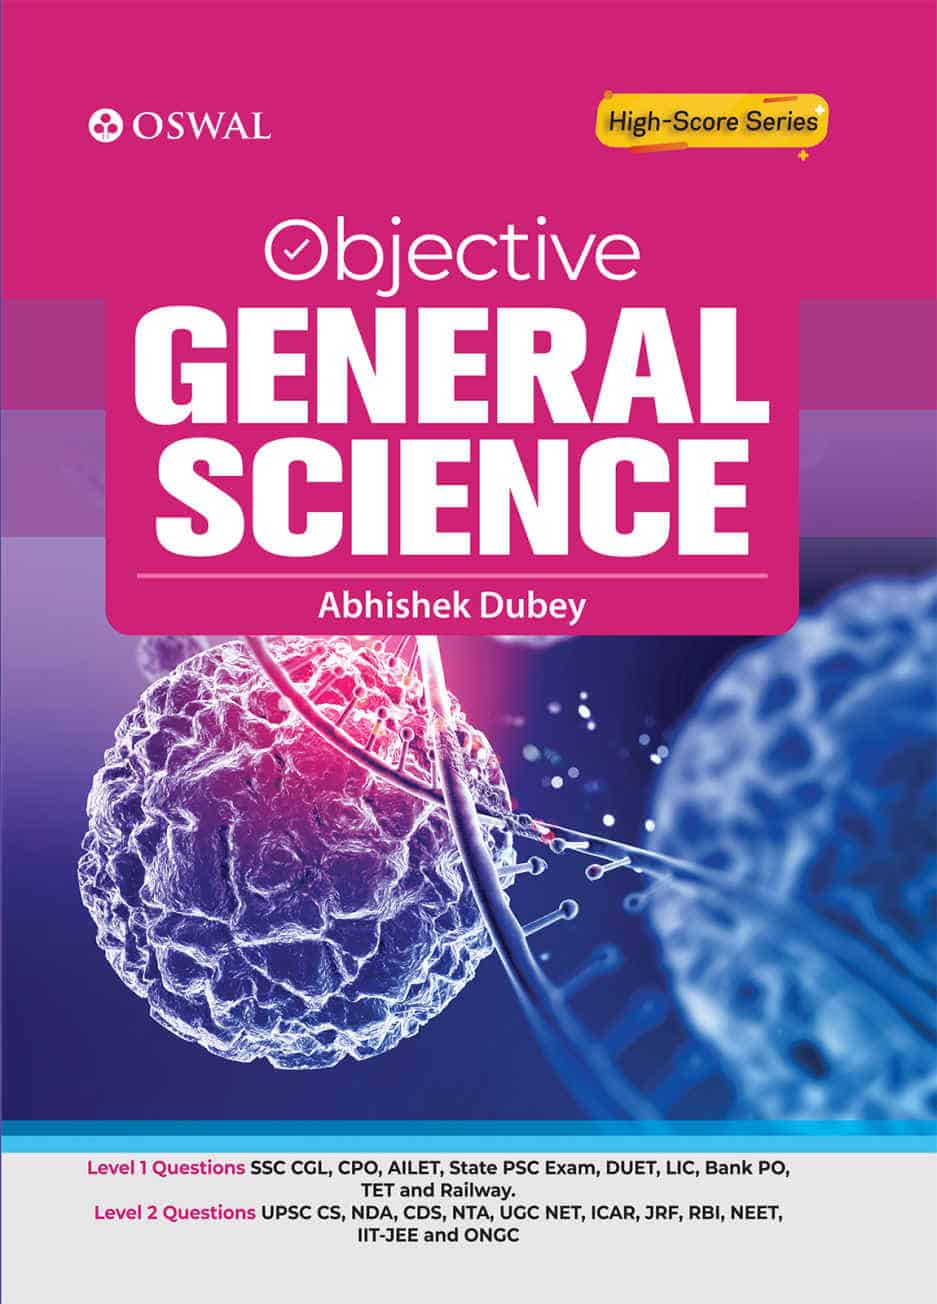 Objective General Science by Abhisek Dubey - Oswaal